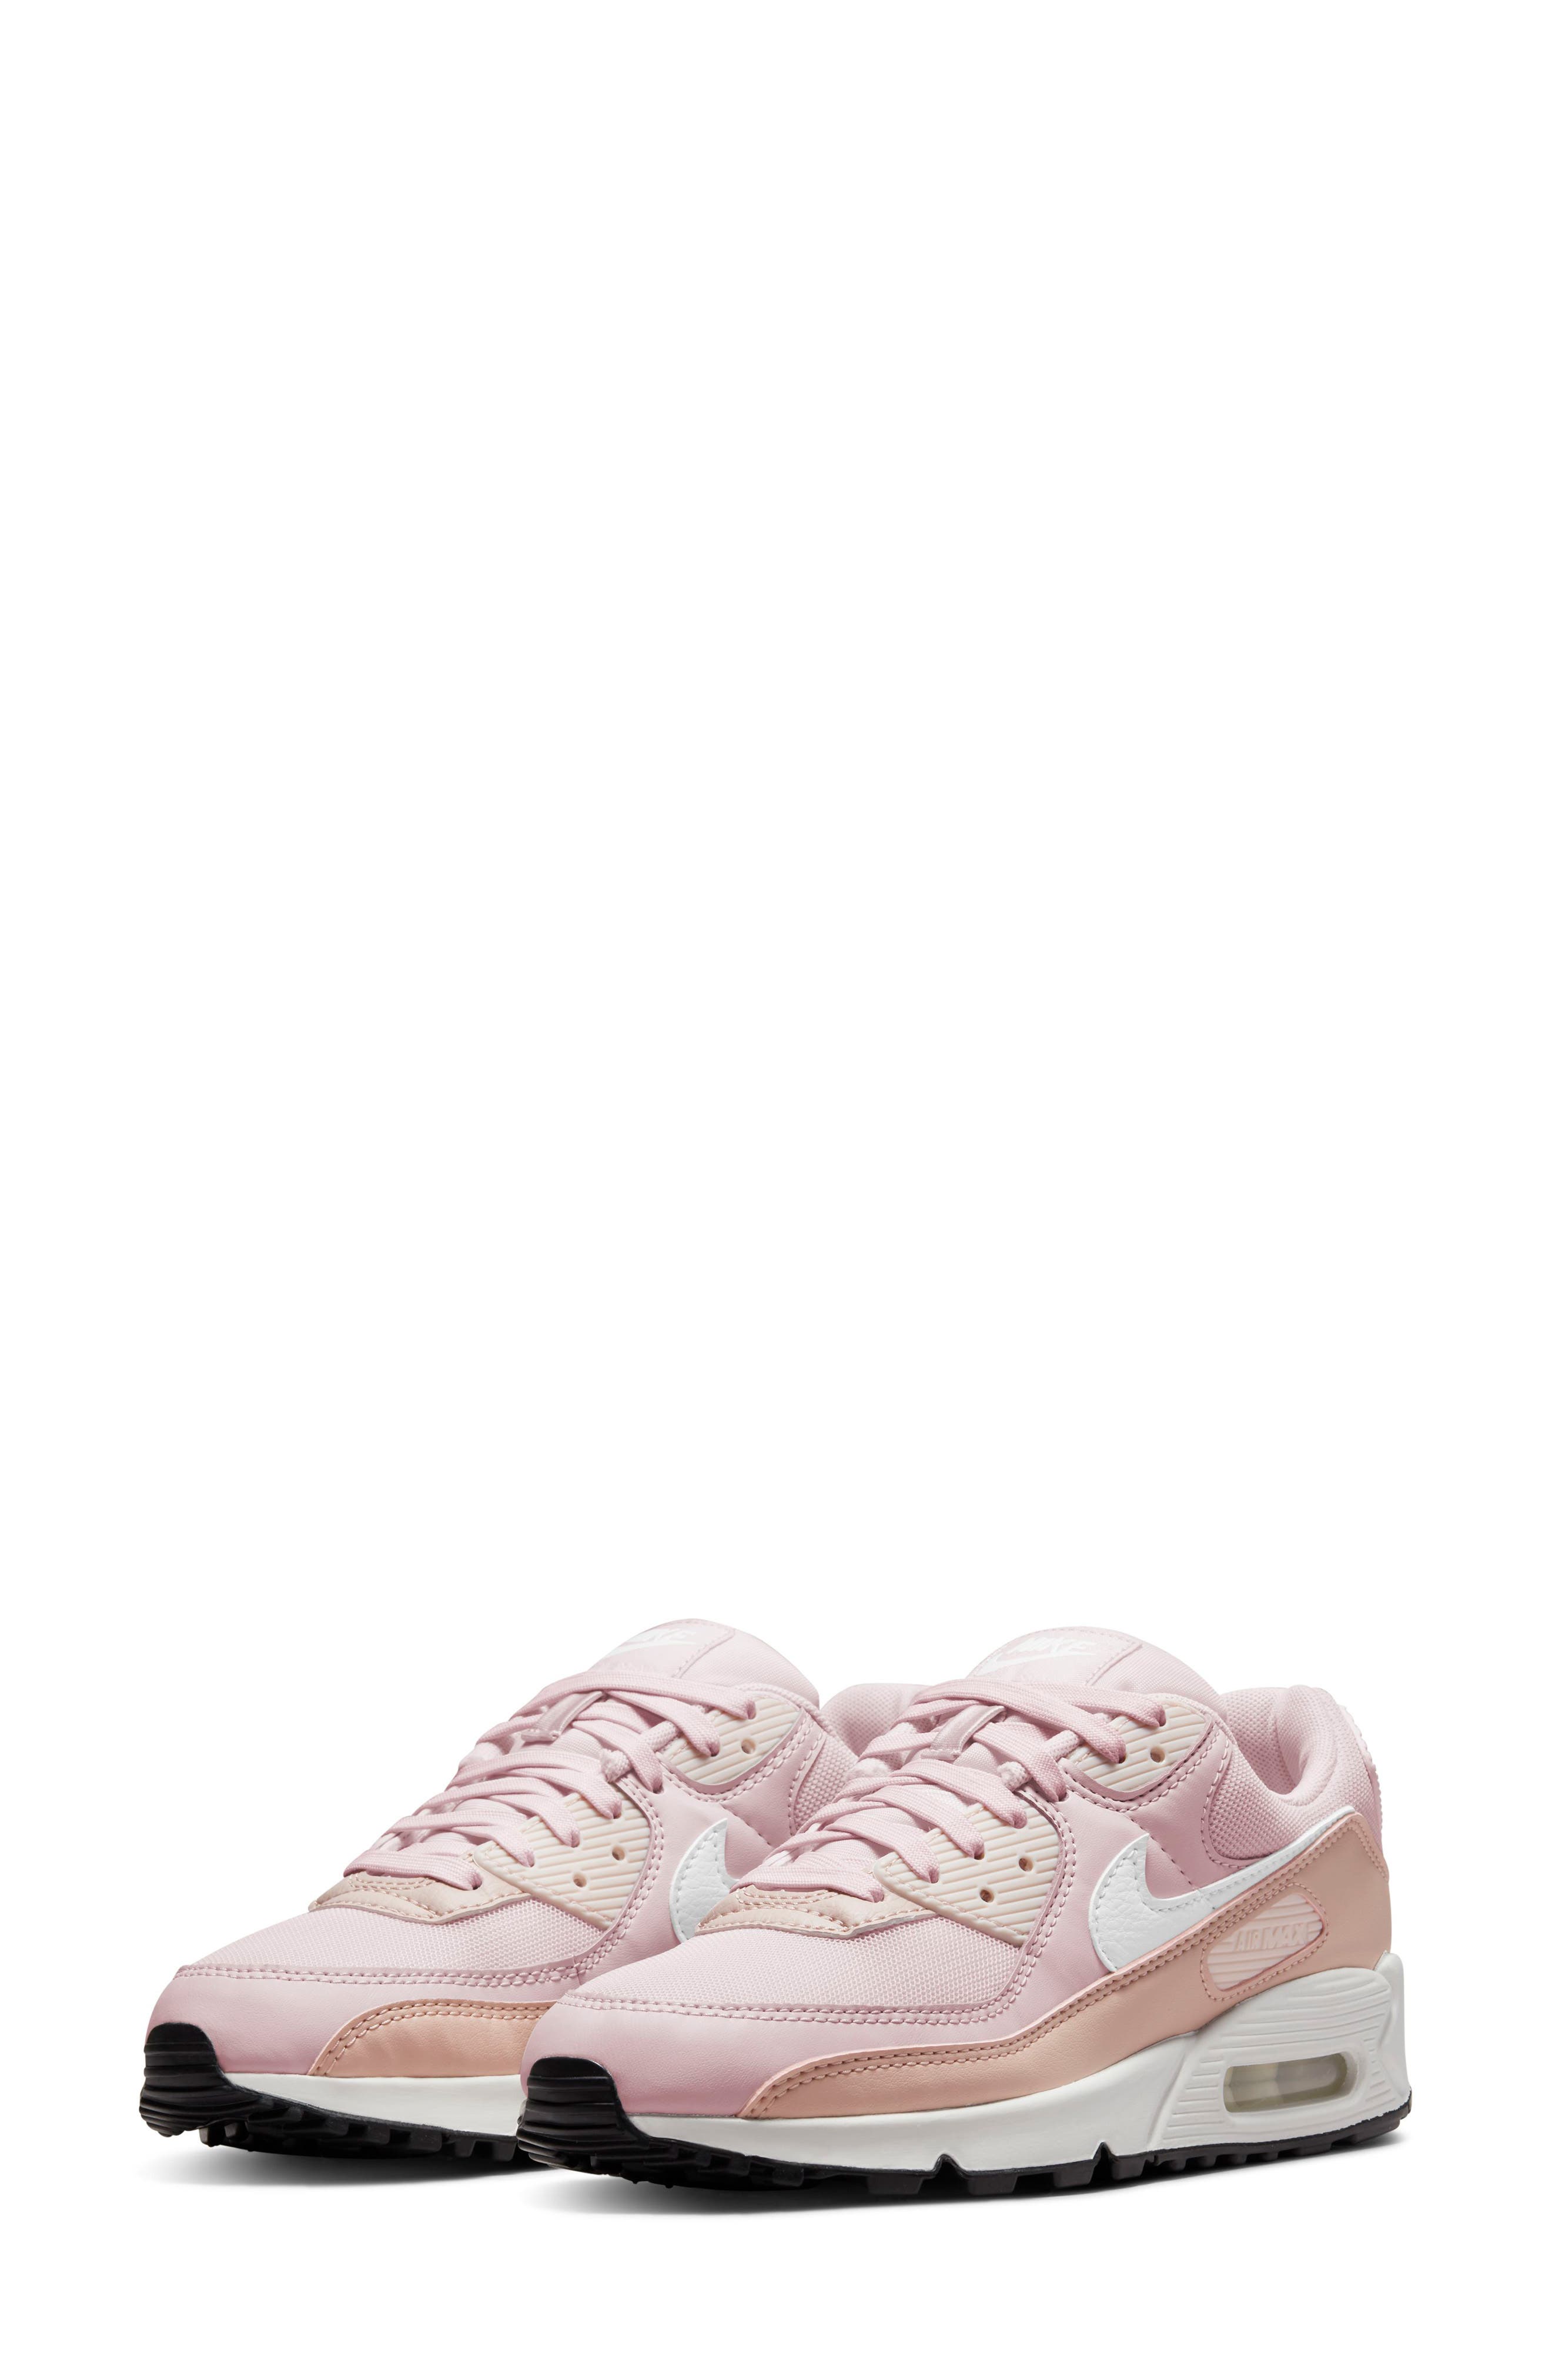 pink air nike shoes